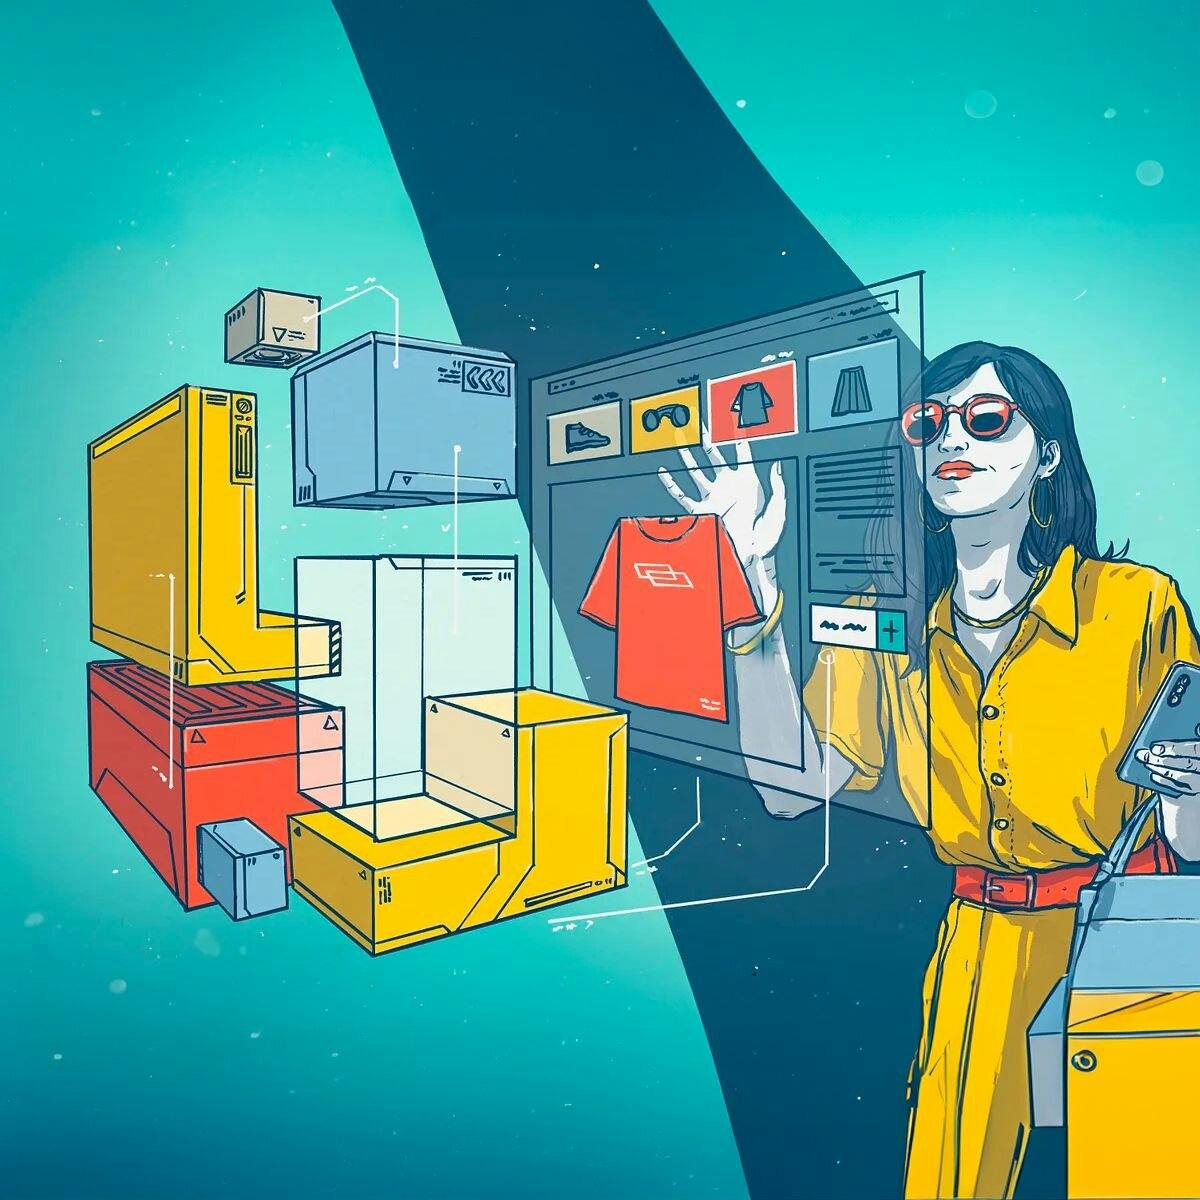 From Lego Bricks to Digital Clicks: How Composable Commerce is Revolutionizing Online Retail